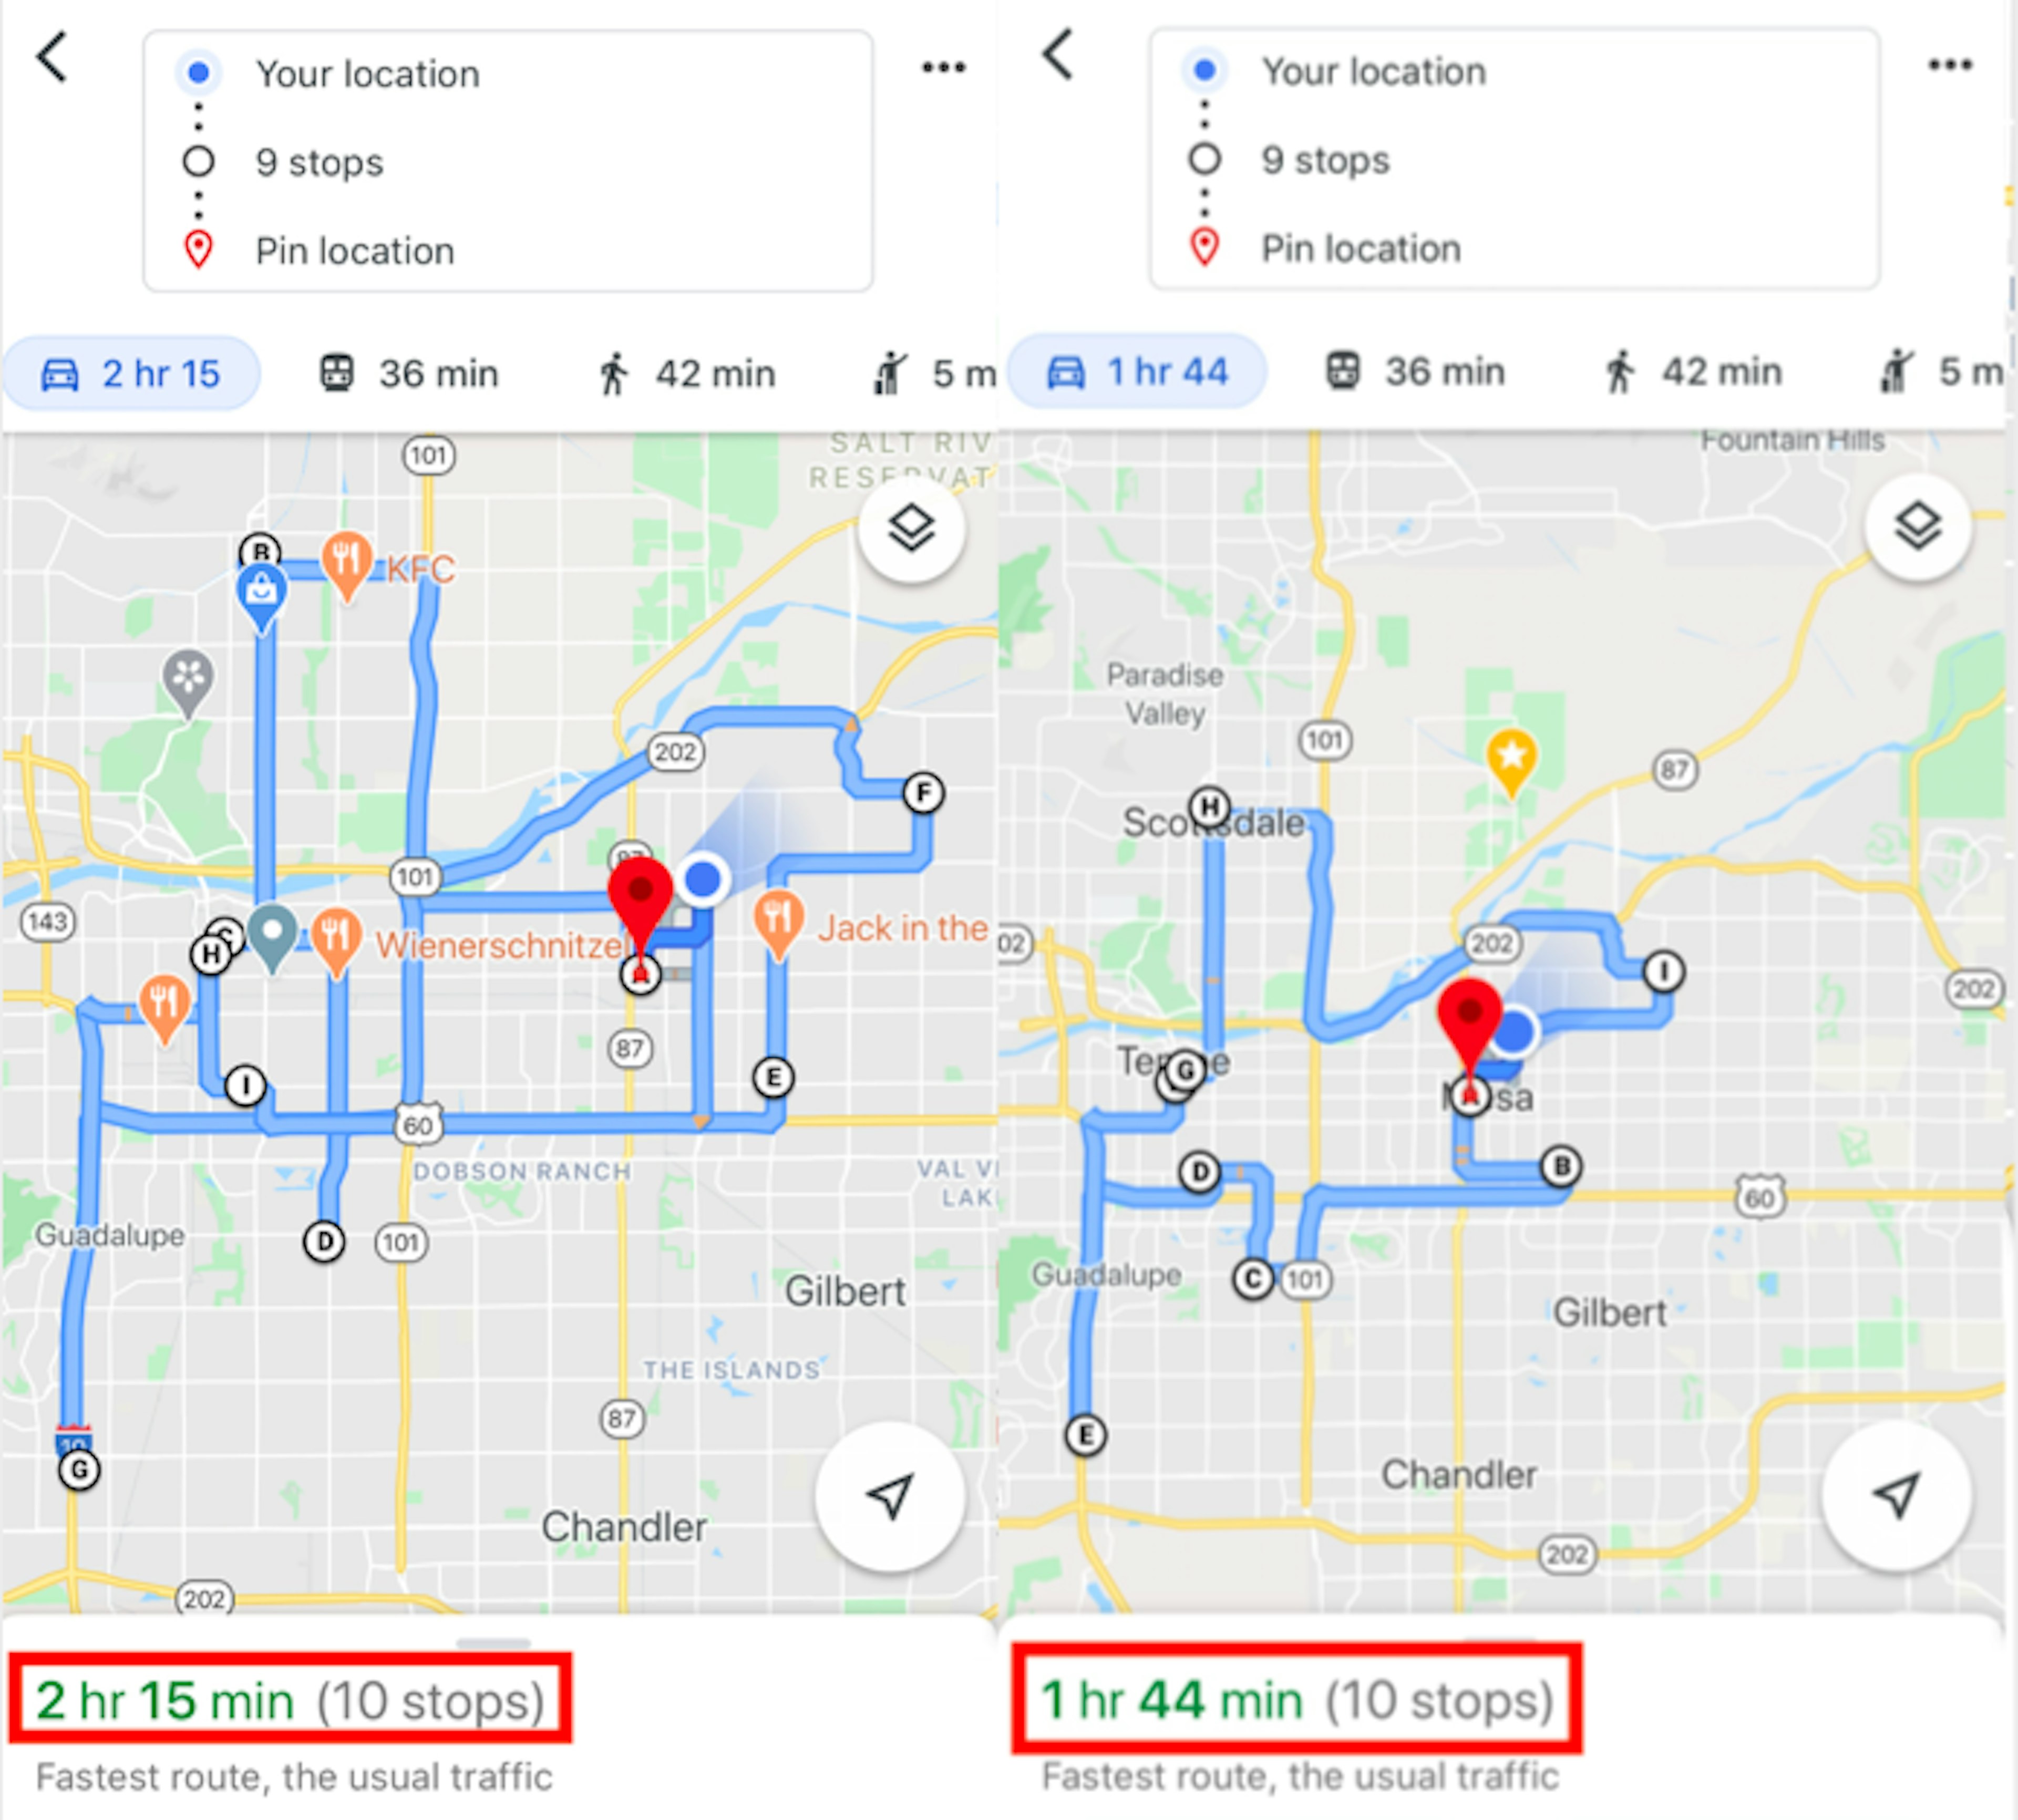 How to Plan a Route with Multiple Stops on Google Maps (In-depth Guide)